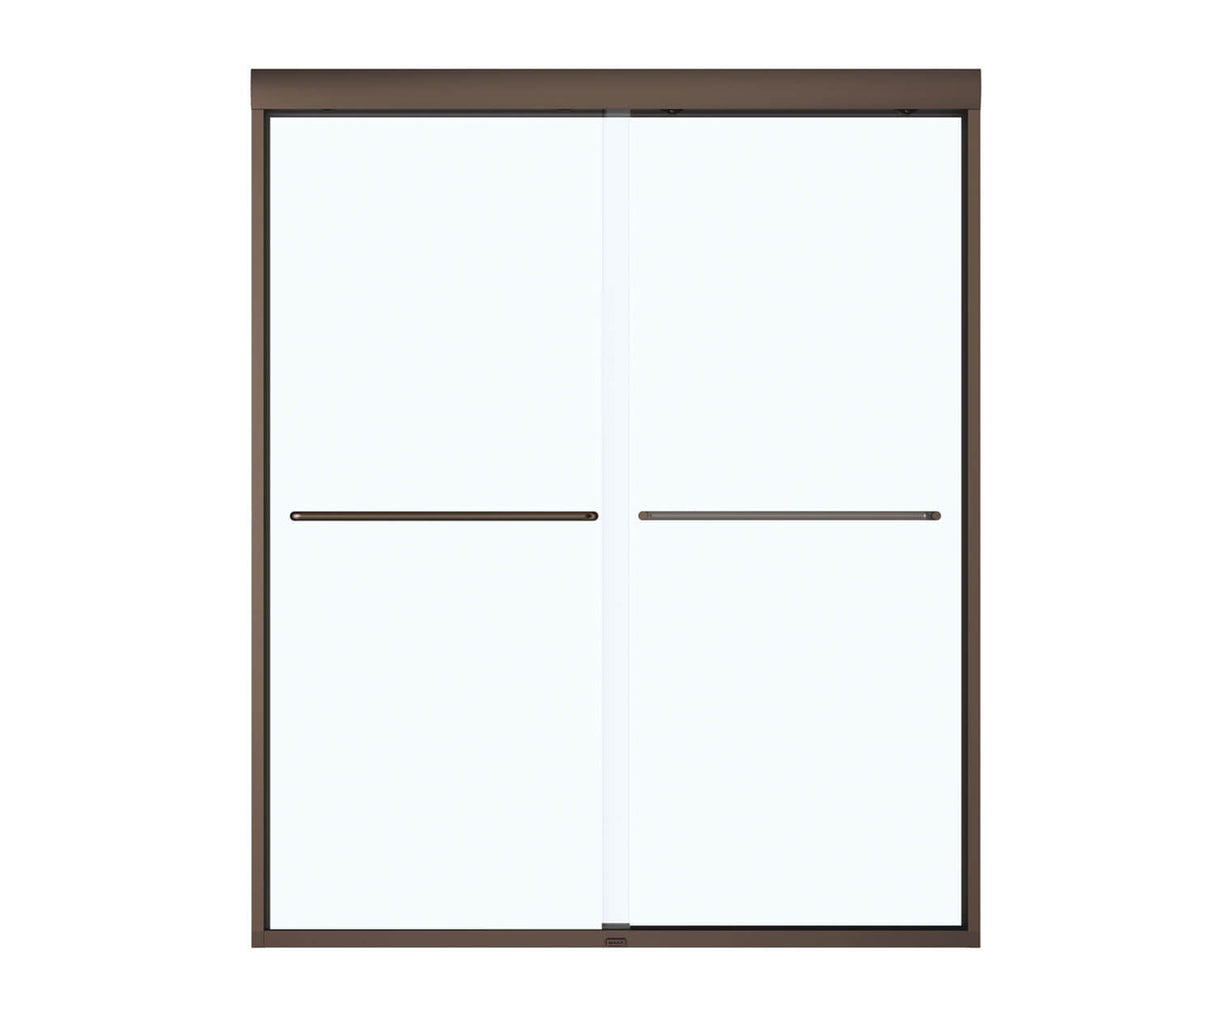 MAAX 135665-900-172-000 Aura 55-59 x 71 in. 6 mm Sliding Shower Door for Alcove Installation with Clear glass in Dark Bronze